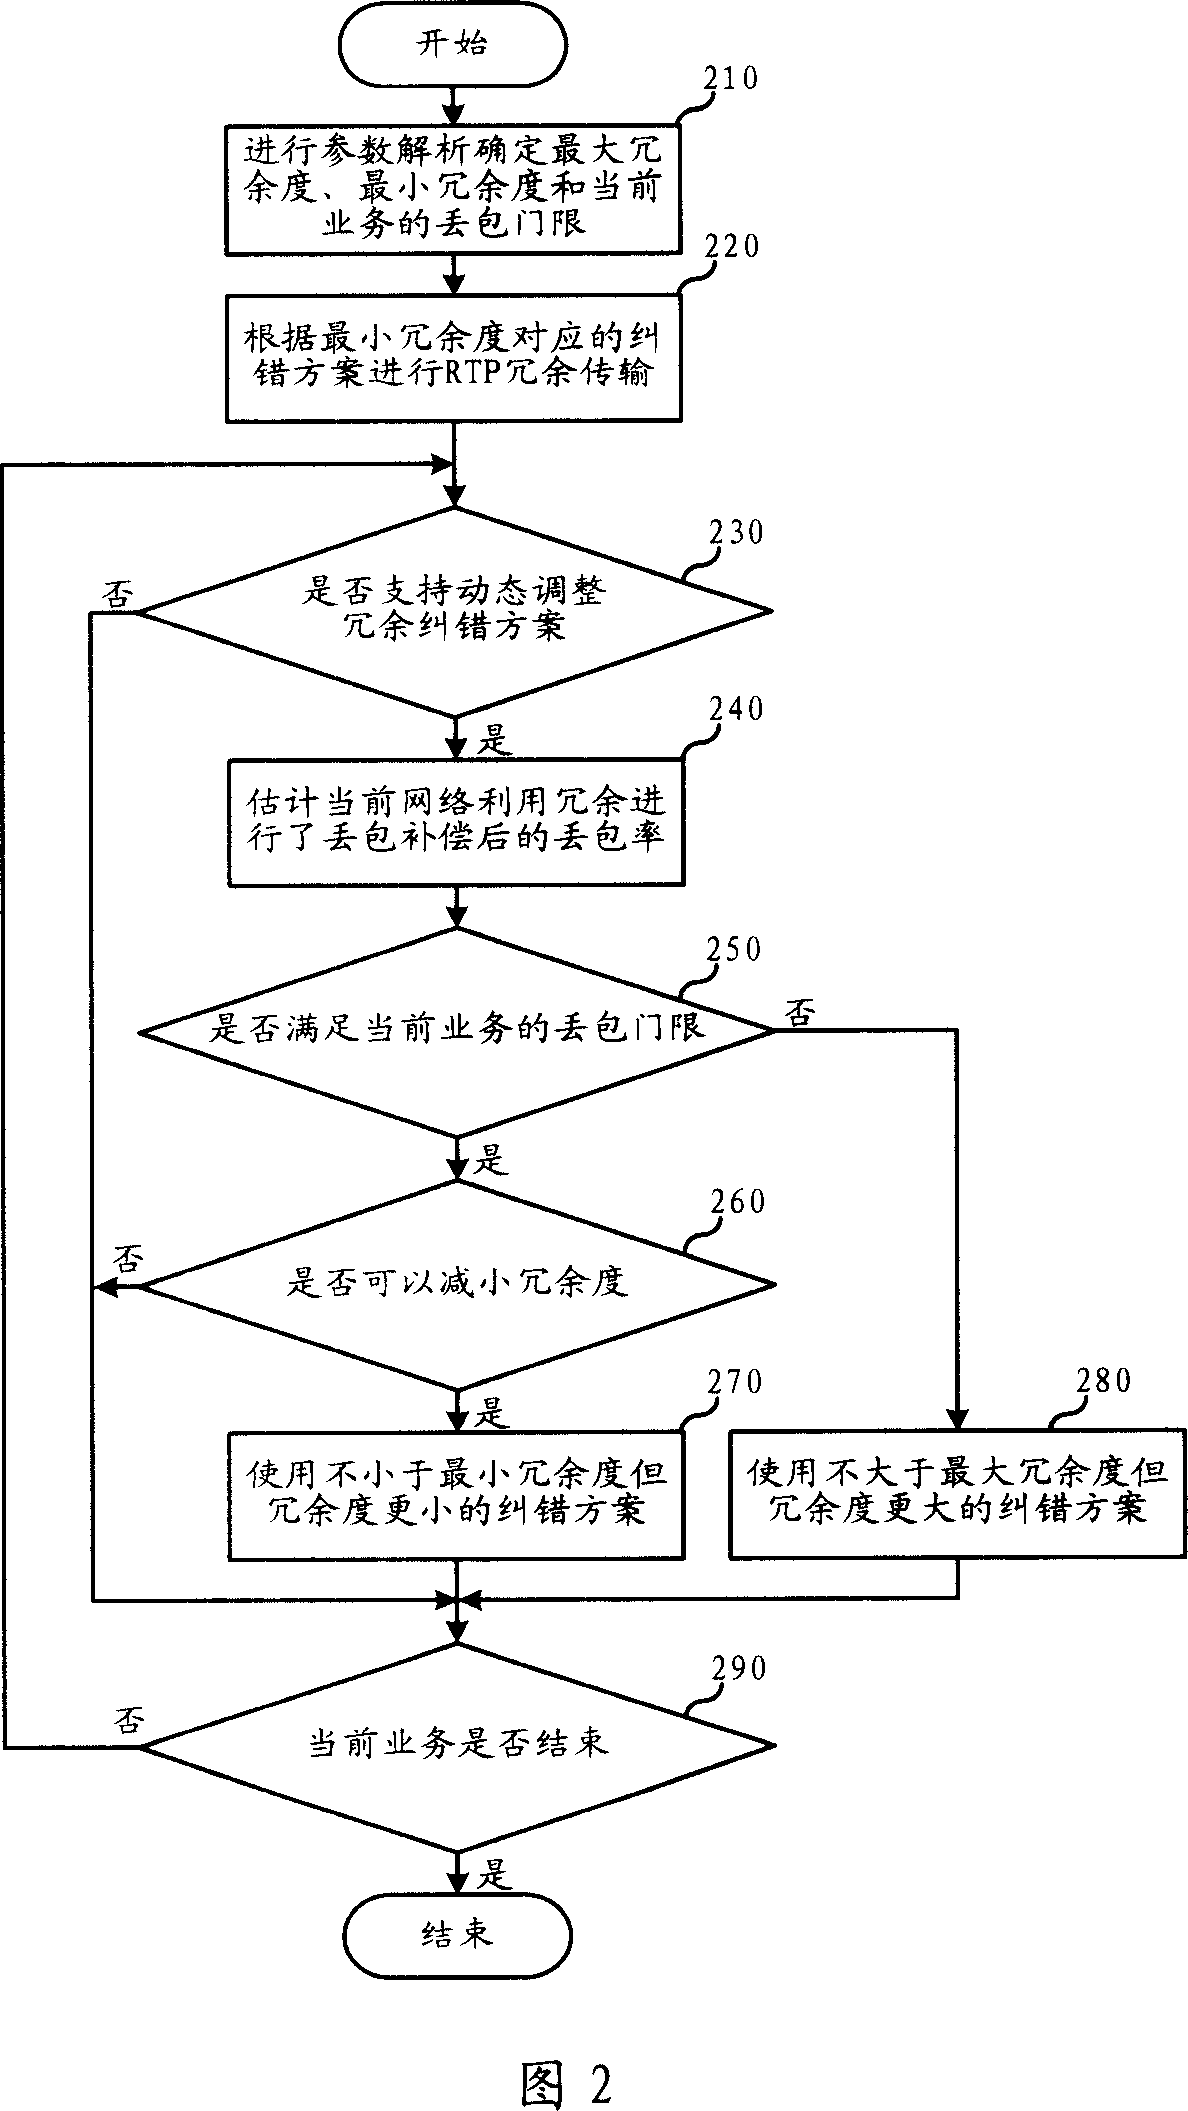 Method and system for realizing realtime transmission protocol message redundancy